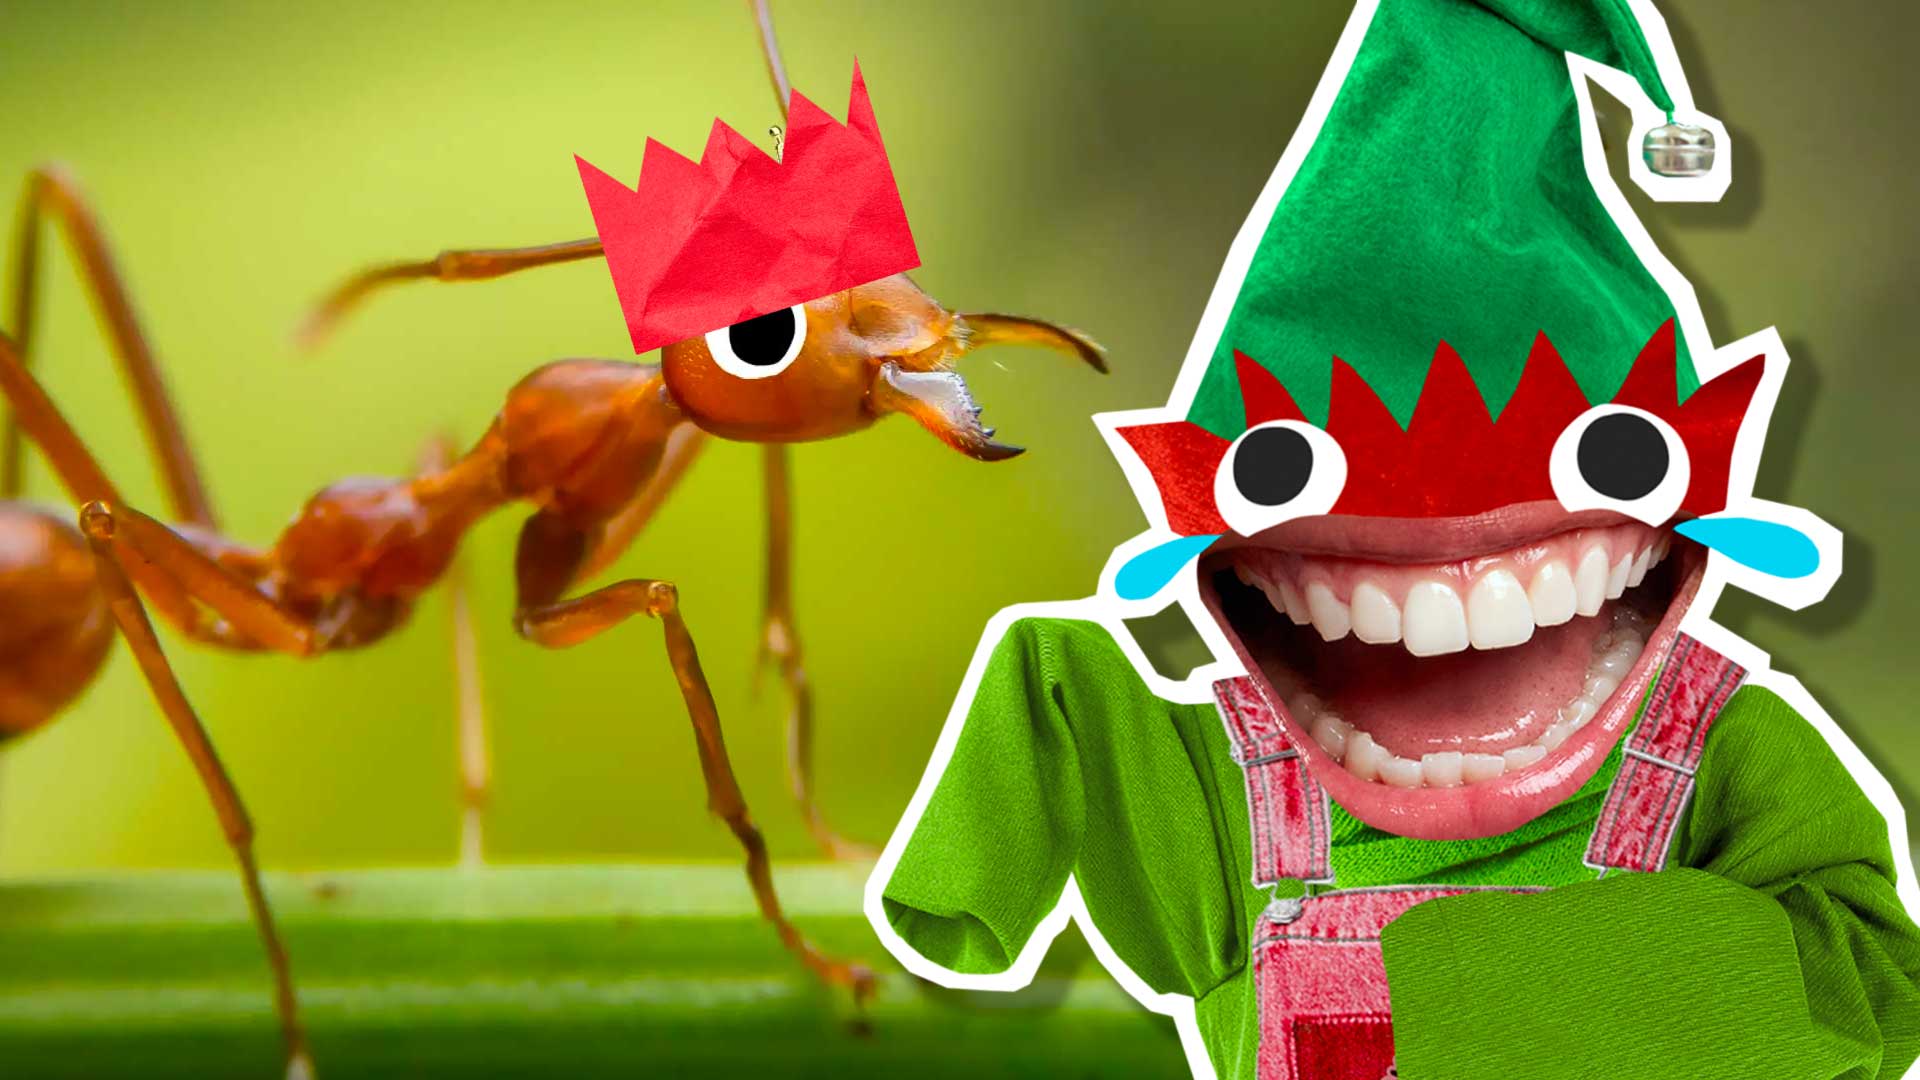 An ant and an elf